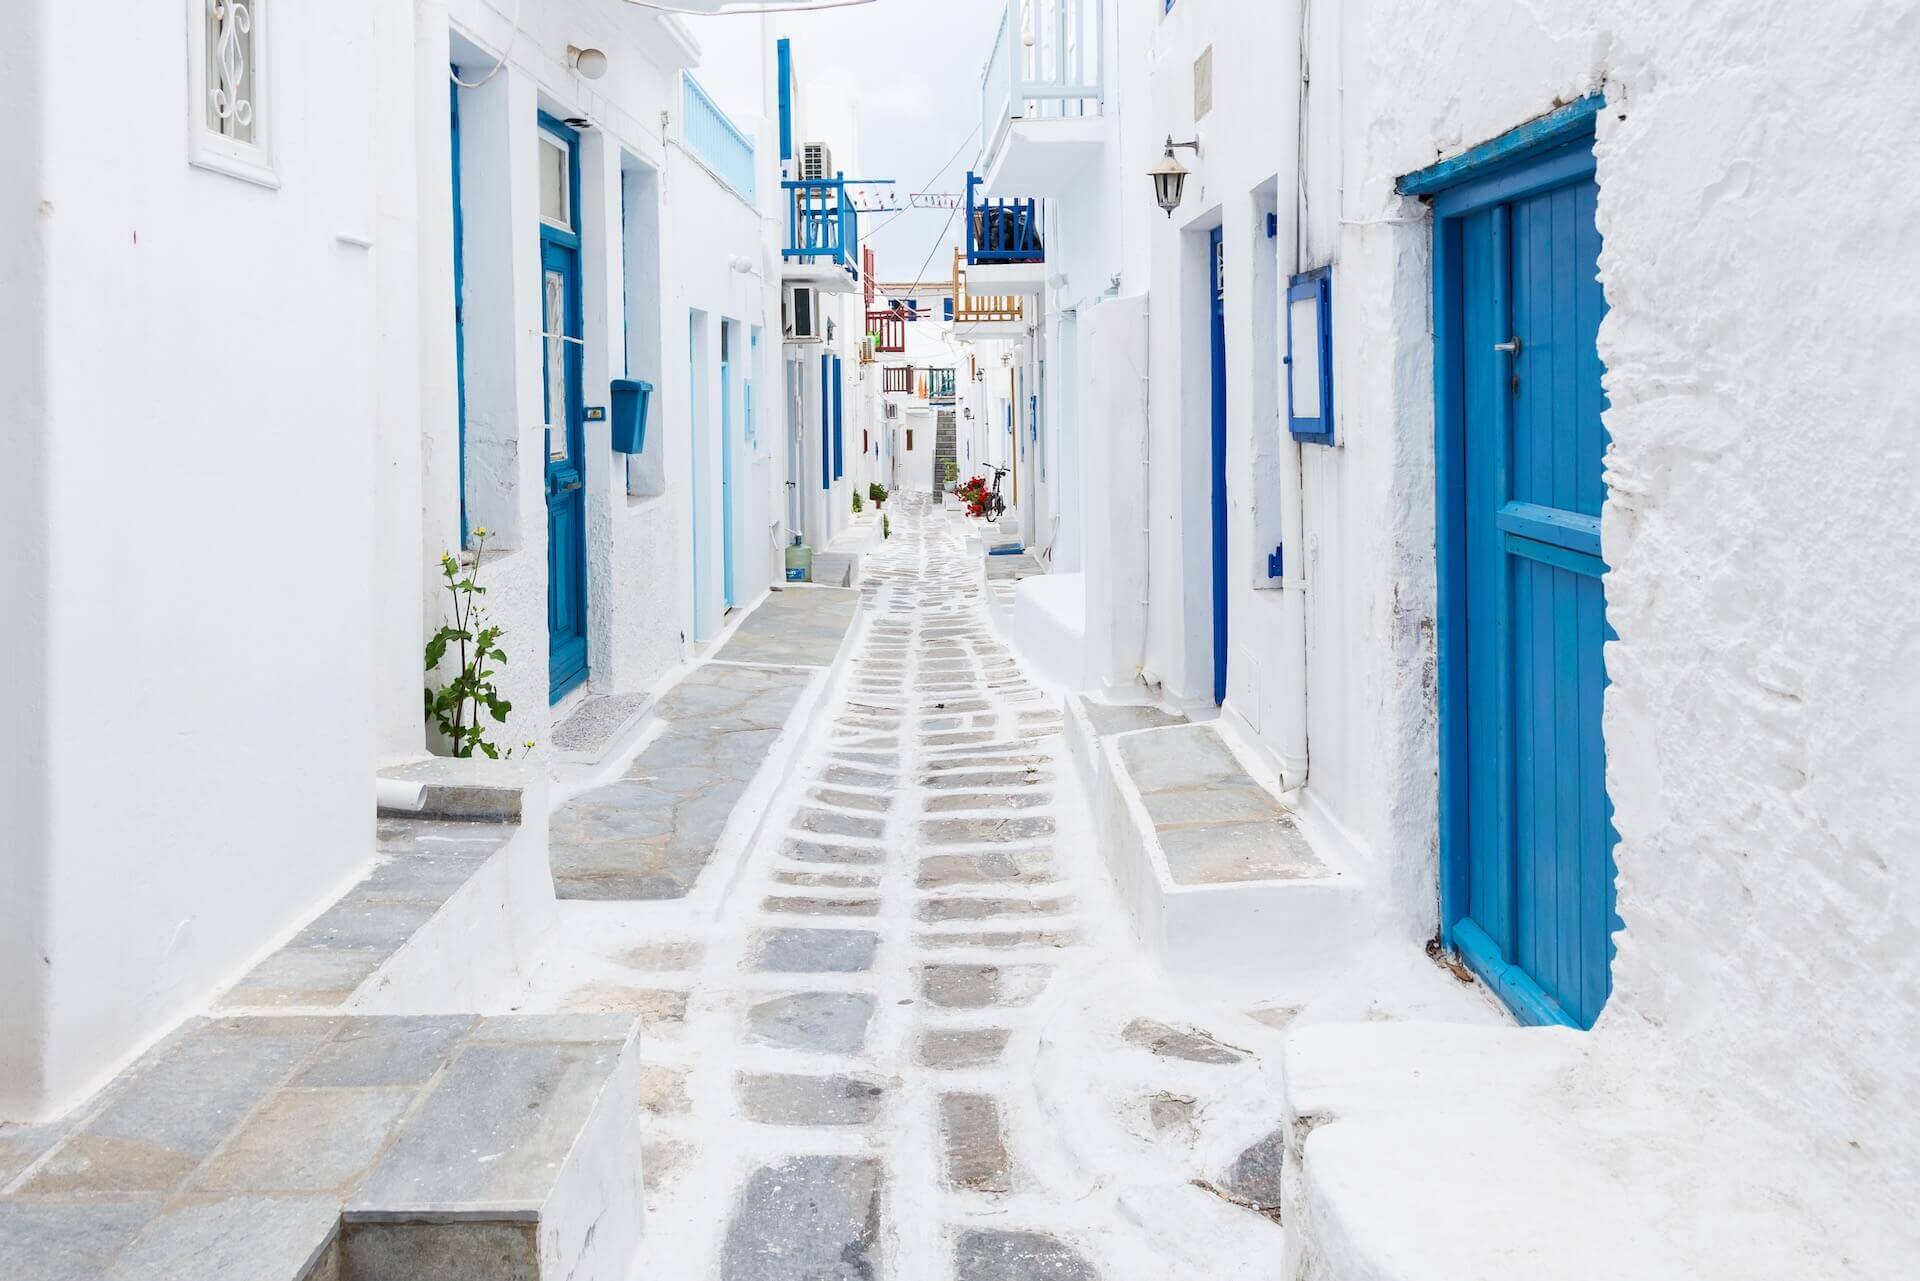 The view of the street in Chora, Mykonos, white houses with blue doors on both side